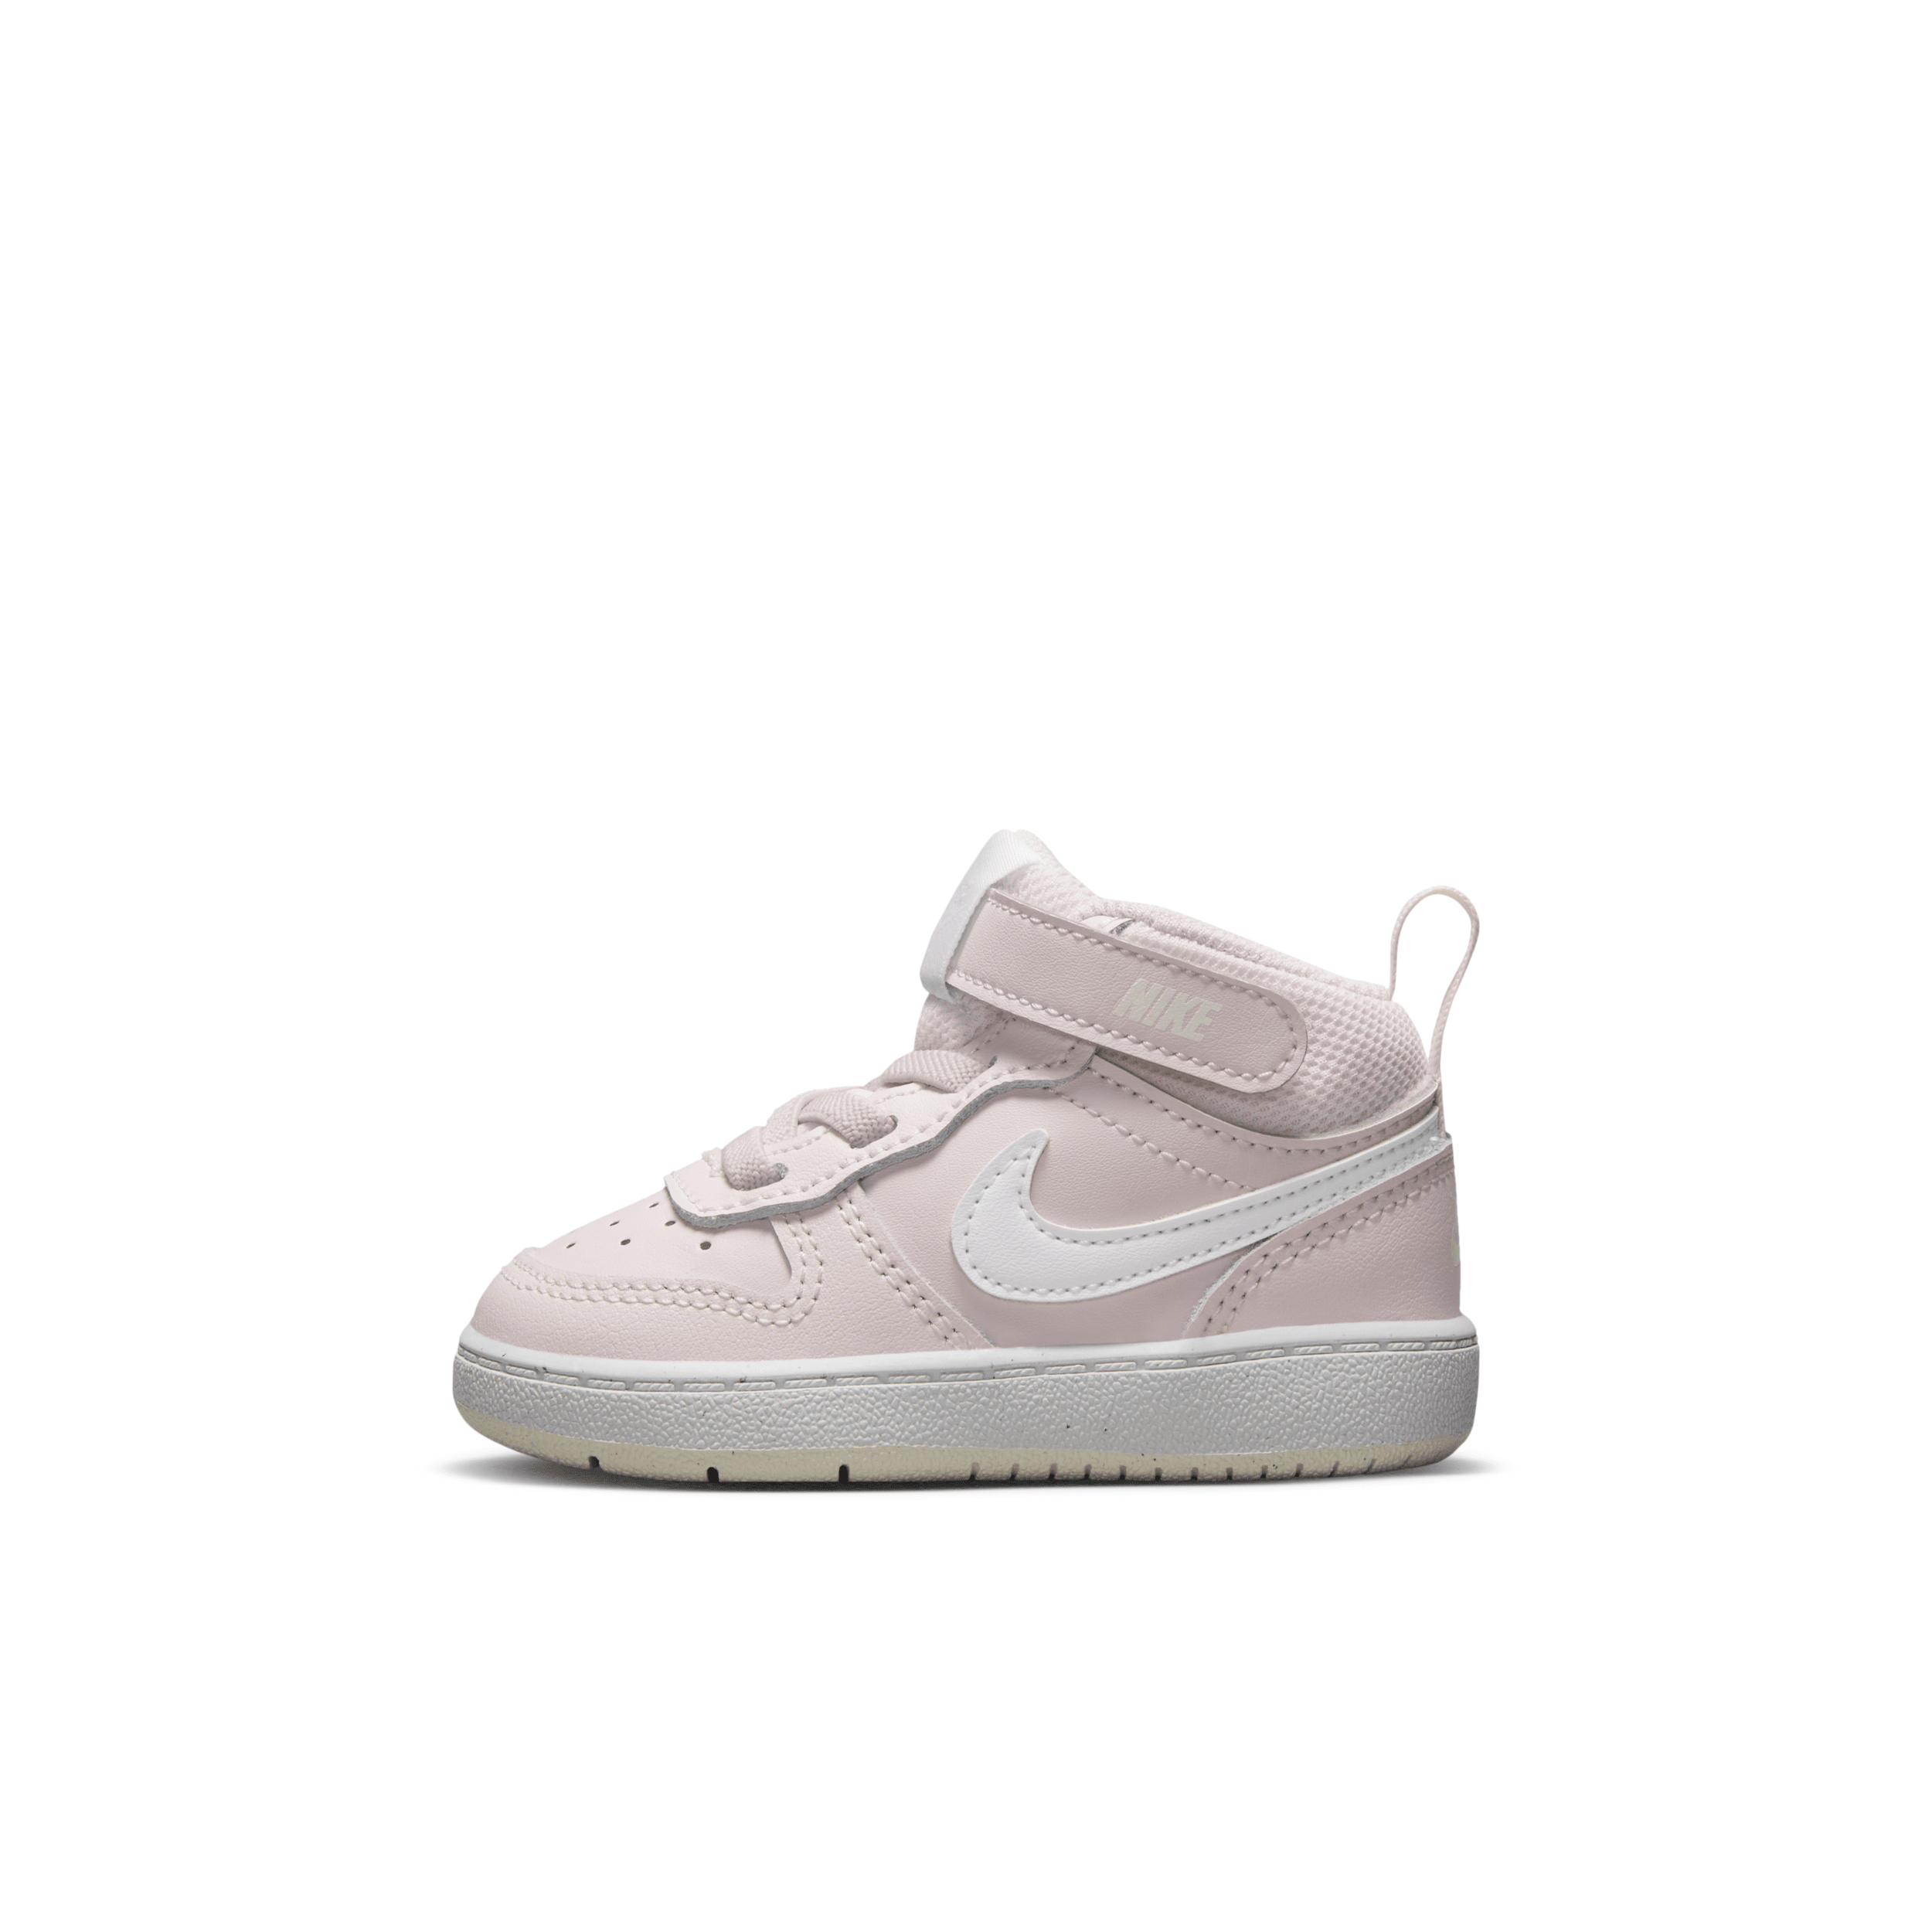 Nike Court Borough Mid 2 Baby/toddler Shoes In Pink